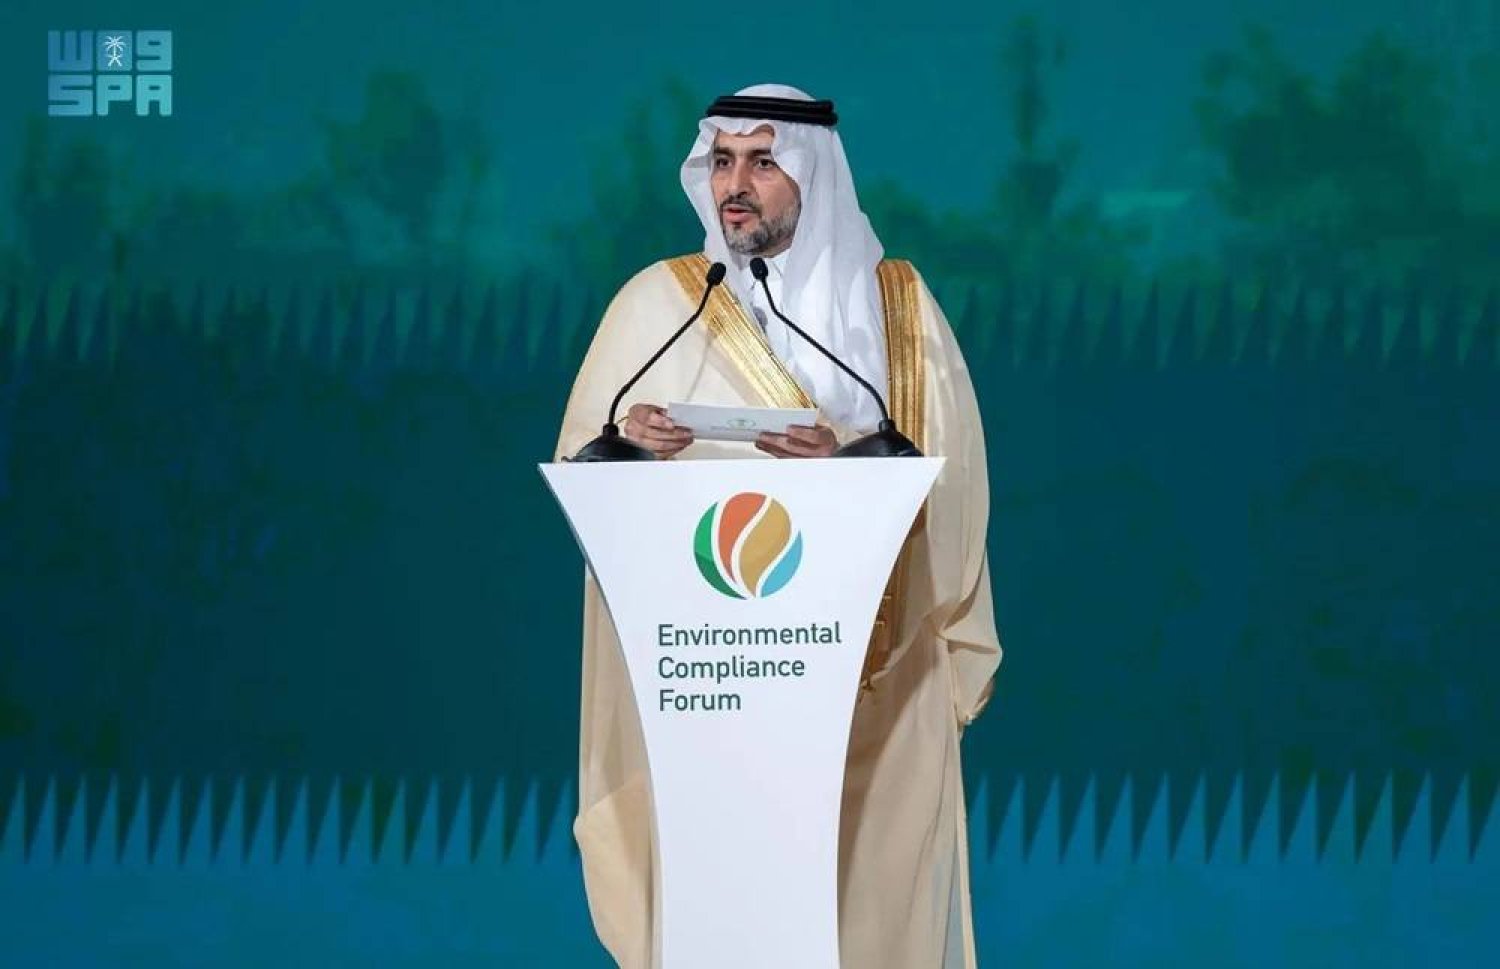 Saudi Vice Minister of Environment, Water and Agriculture Eng. Mansour Al Mushaiti speaks at the event in Riyadh. (SPA)